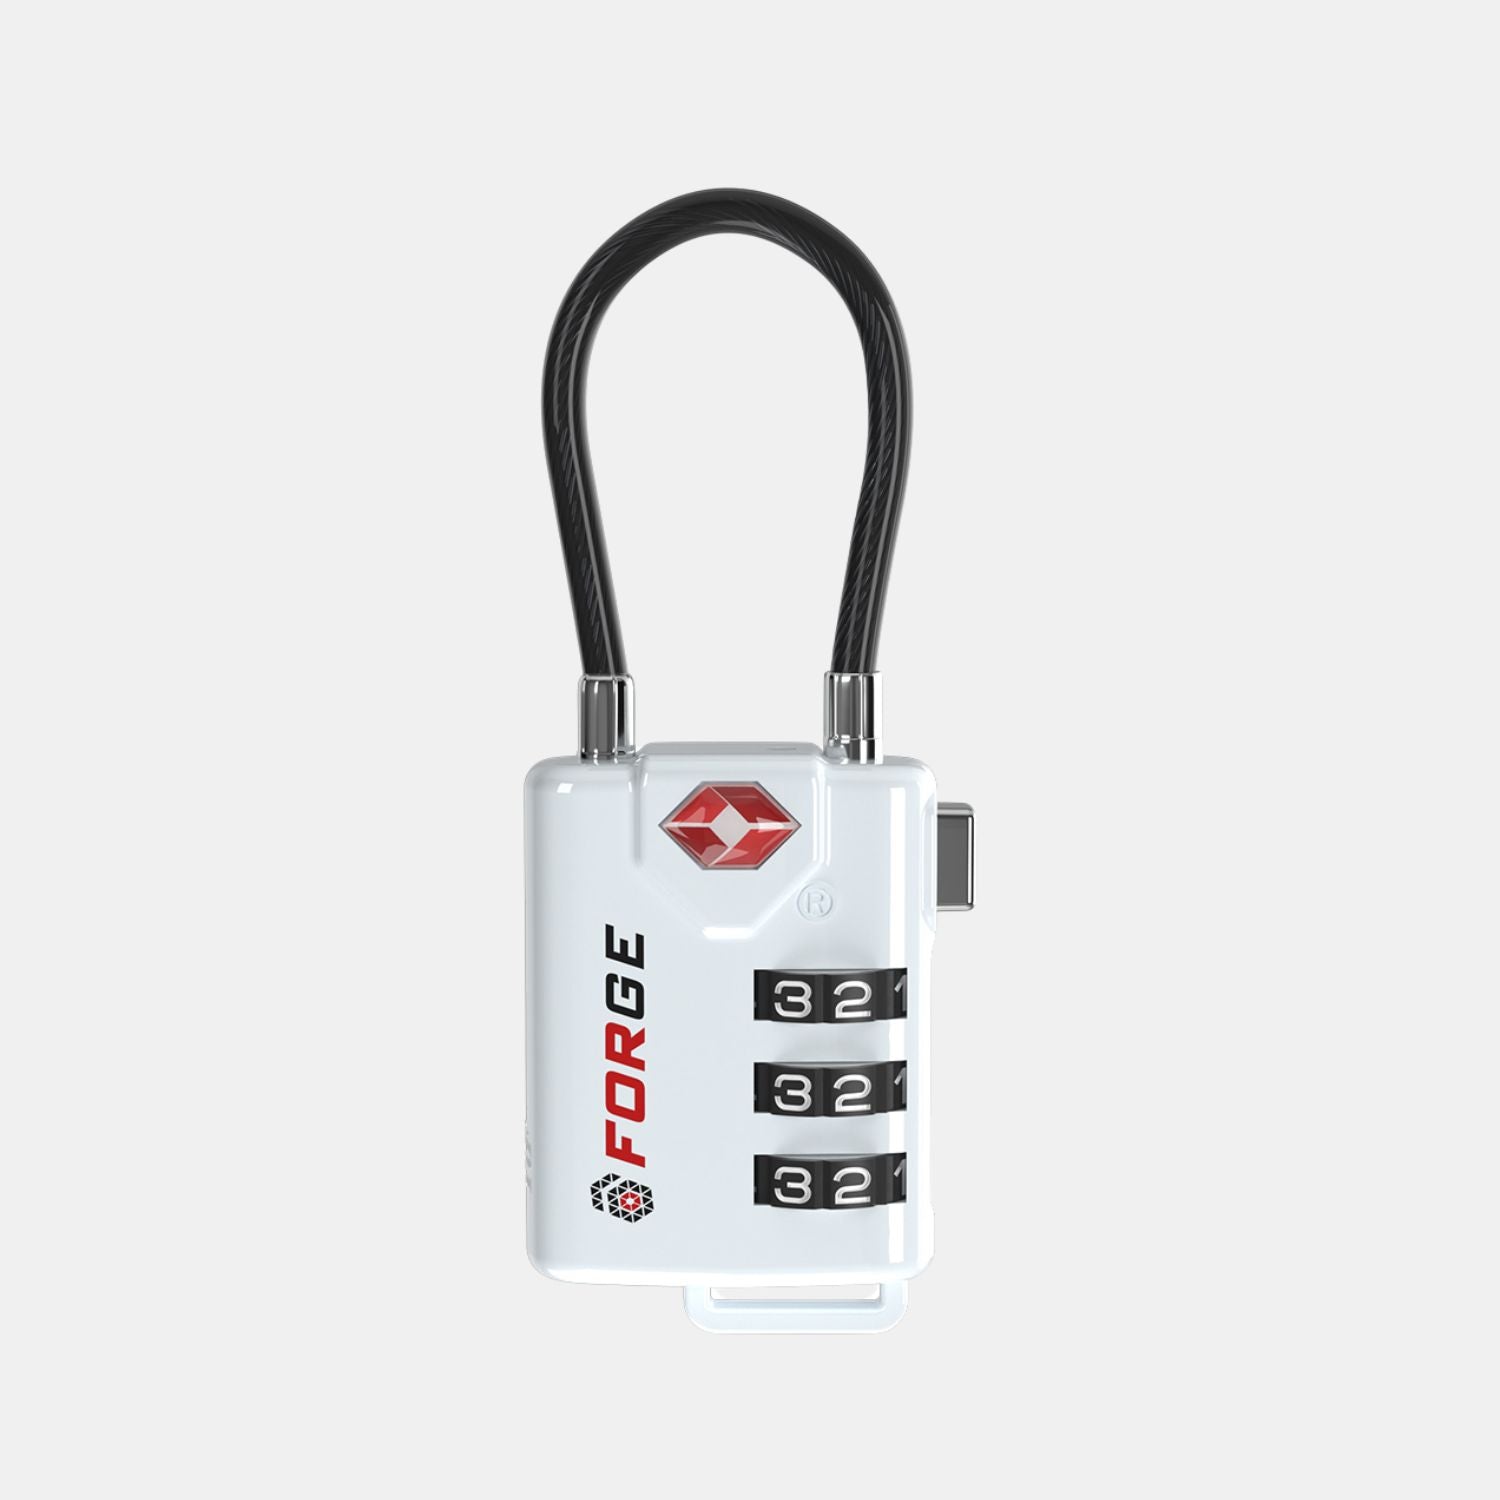 TSA Approved Cable Luggage Lock with Easy-to-Read Dials, White 4 Locks